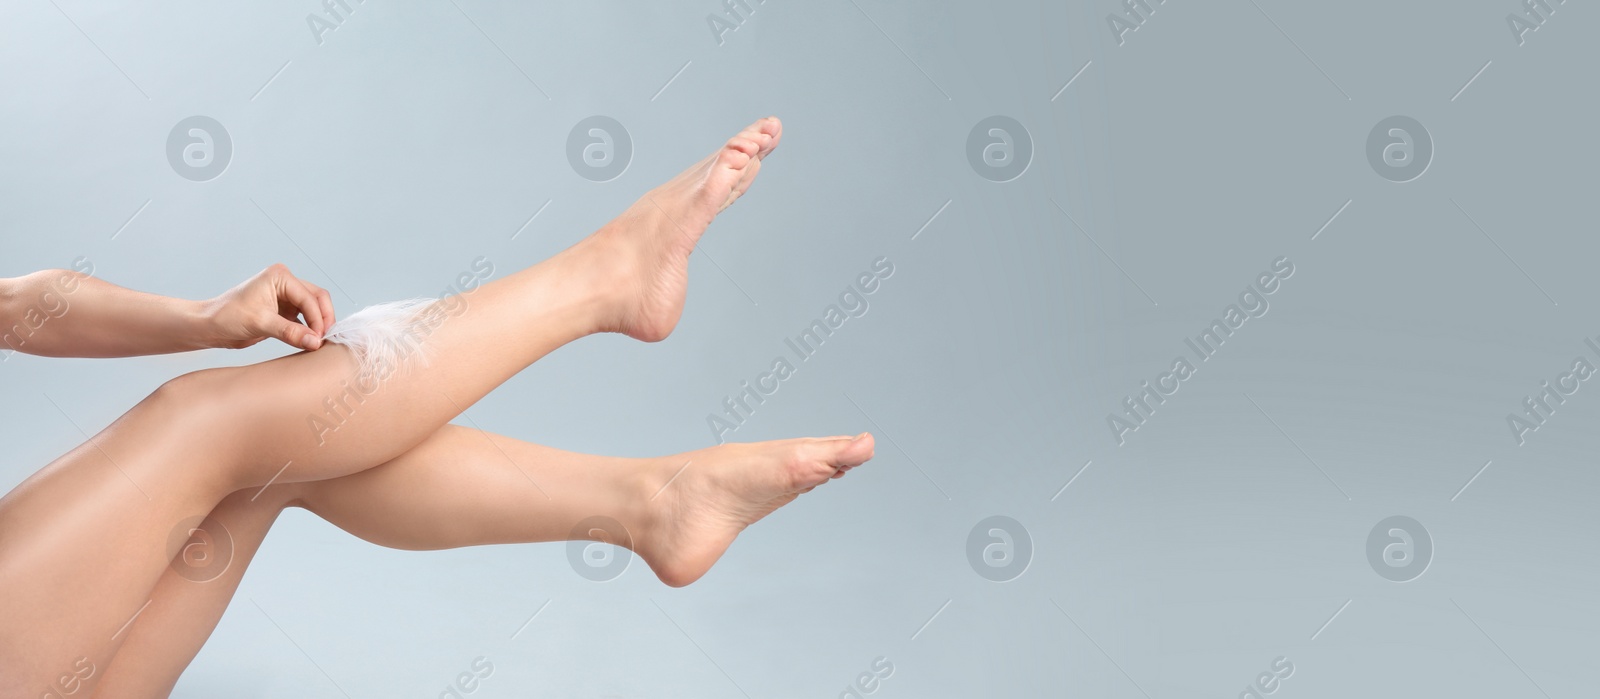 Image of Woman touching leg with feather after epilation on grey background, closeup view with space for text. Banner design